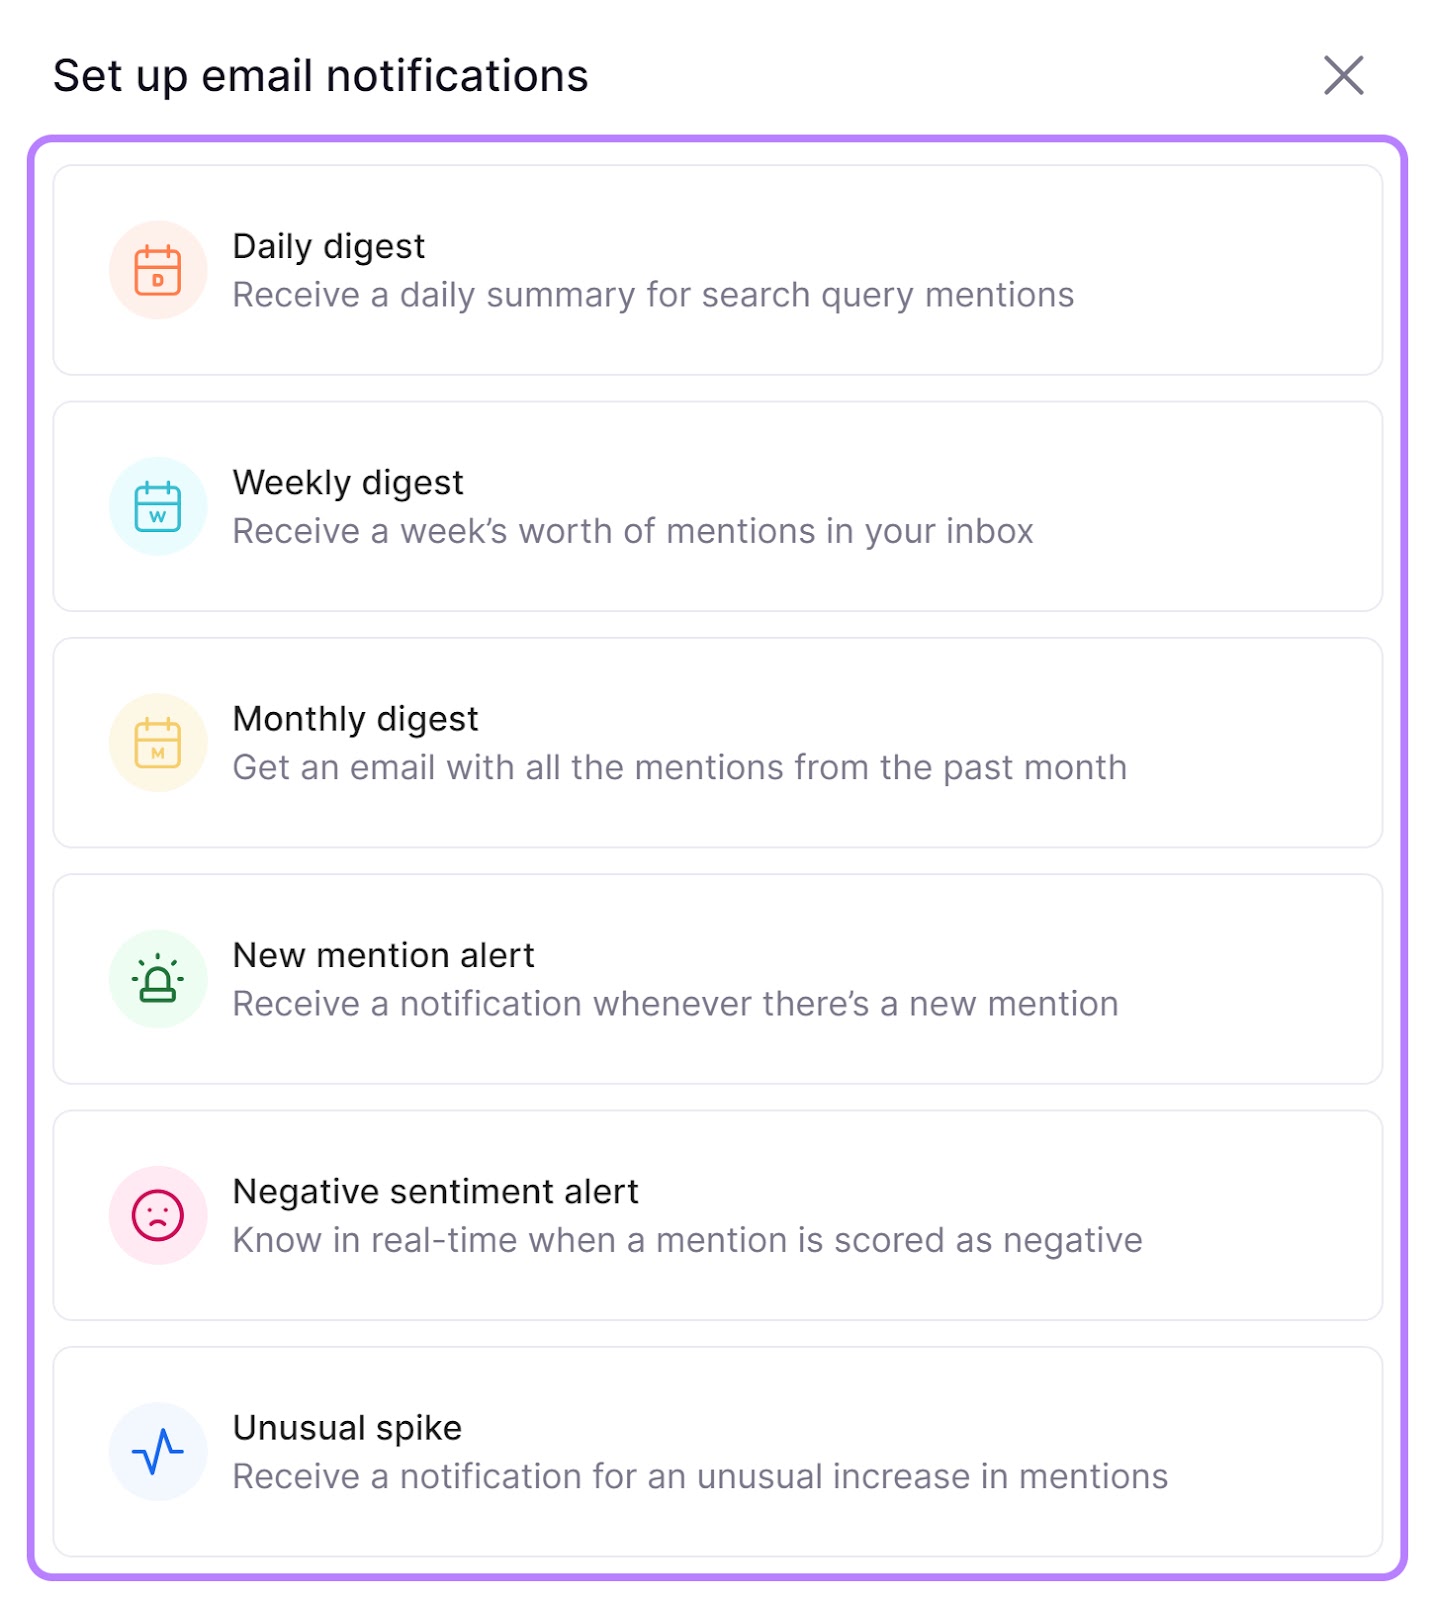 "Set up email notifications" window in Brand Monitoring app